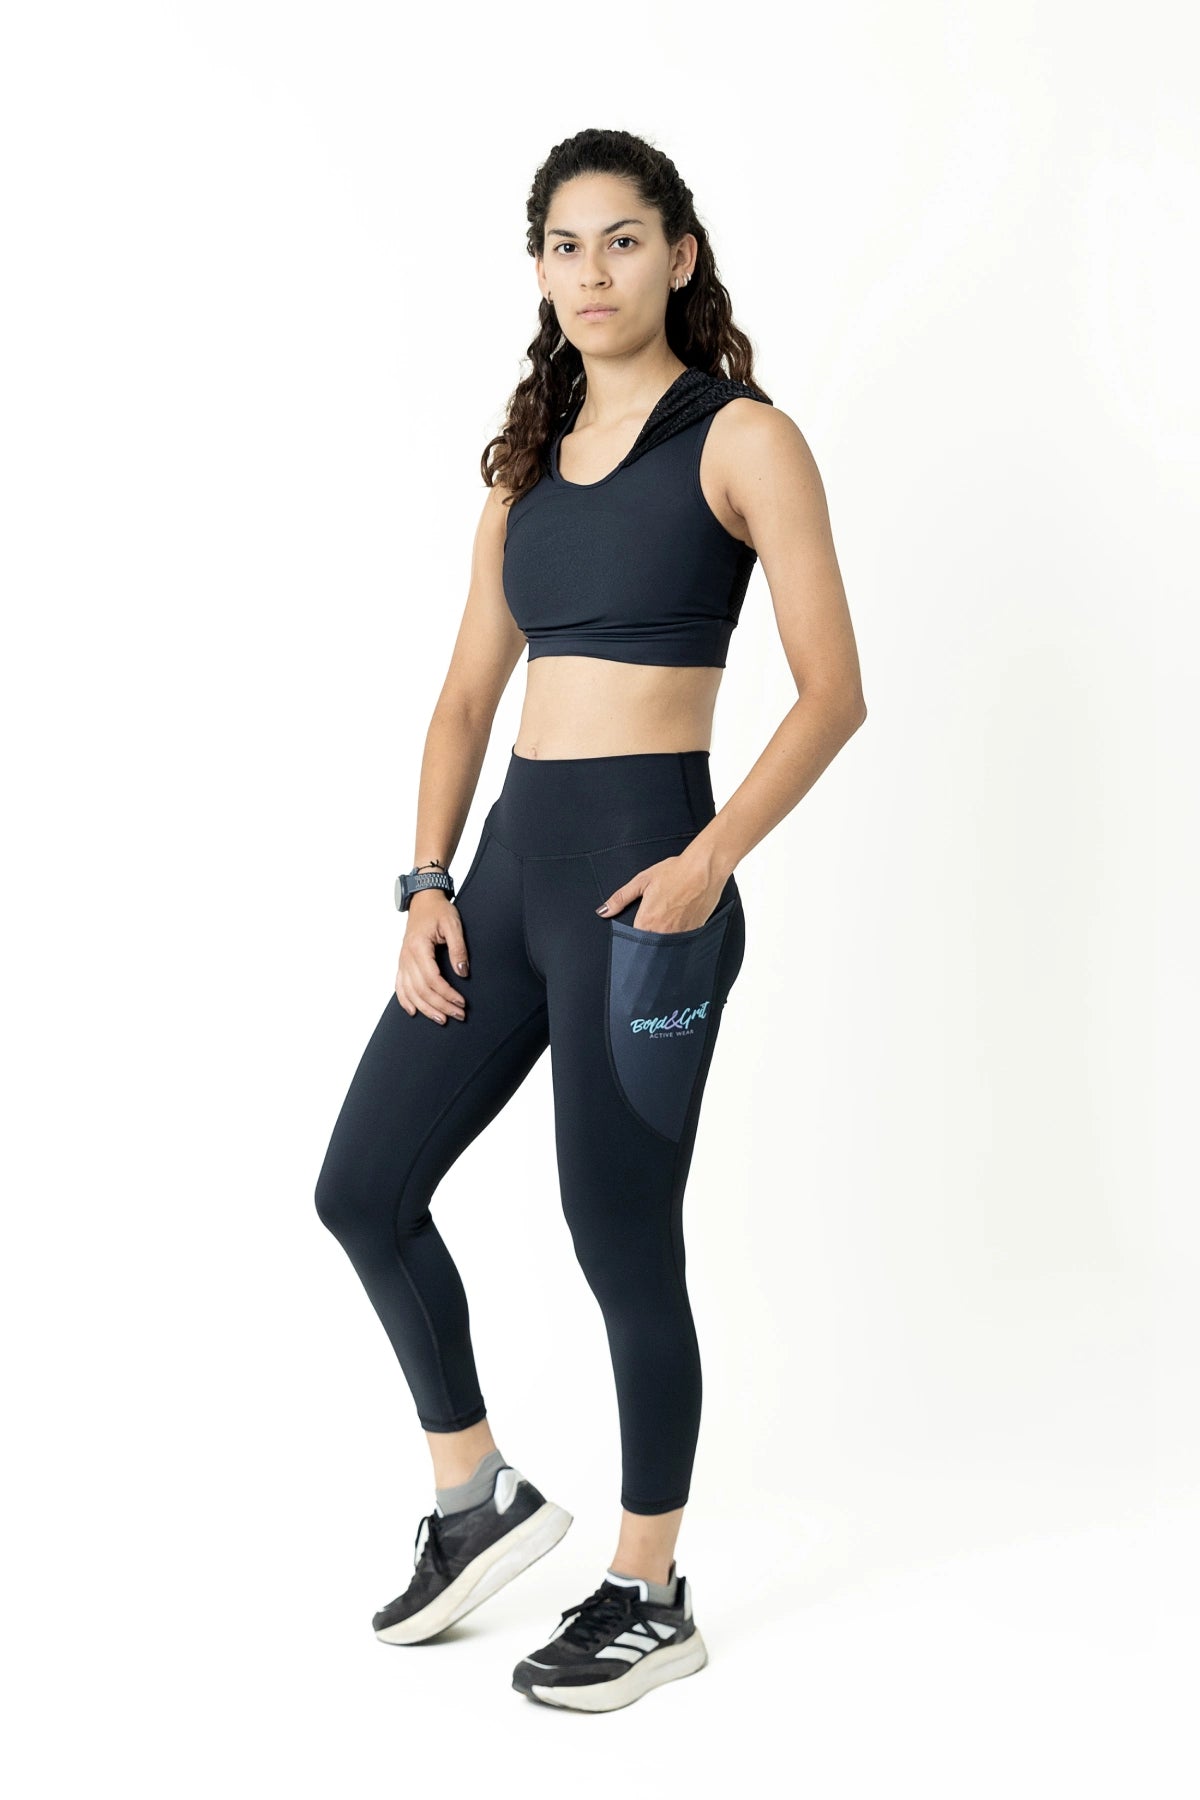 Believe Cropped Leggings, Sun Protective Clothing